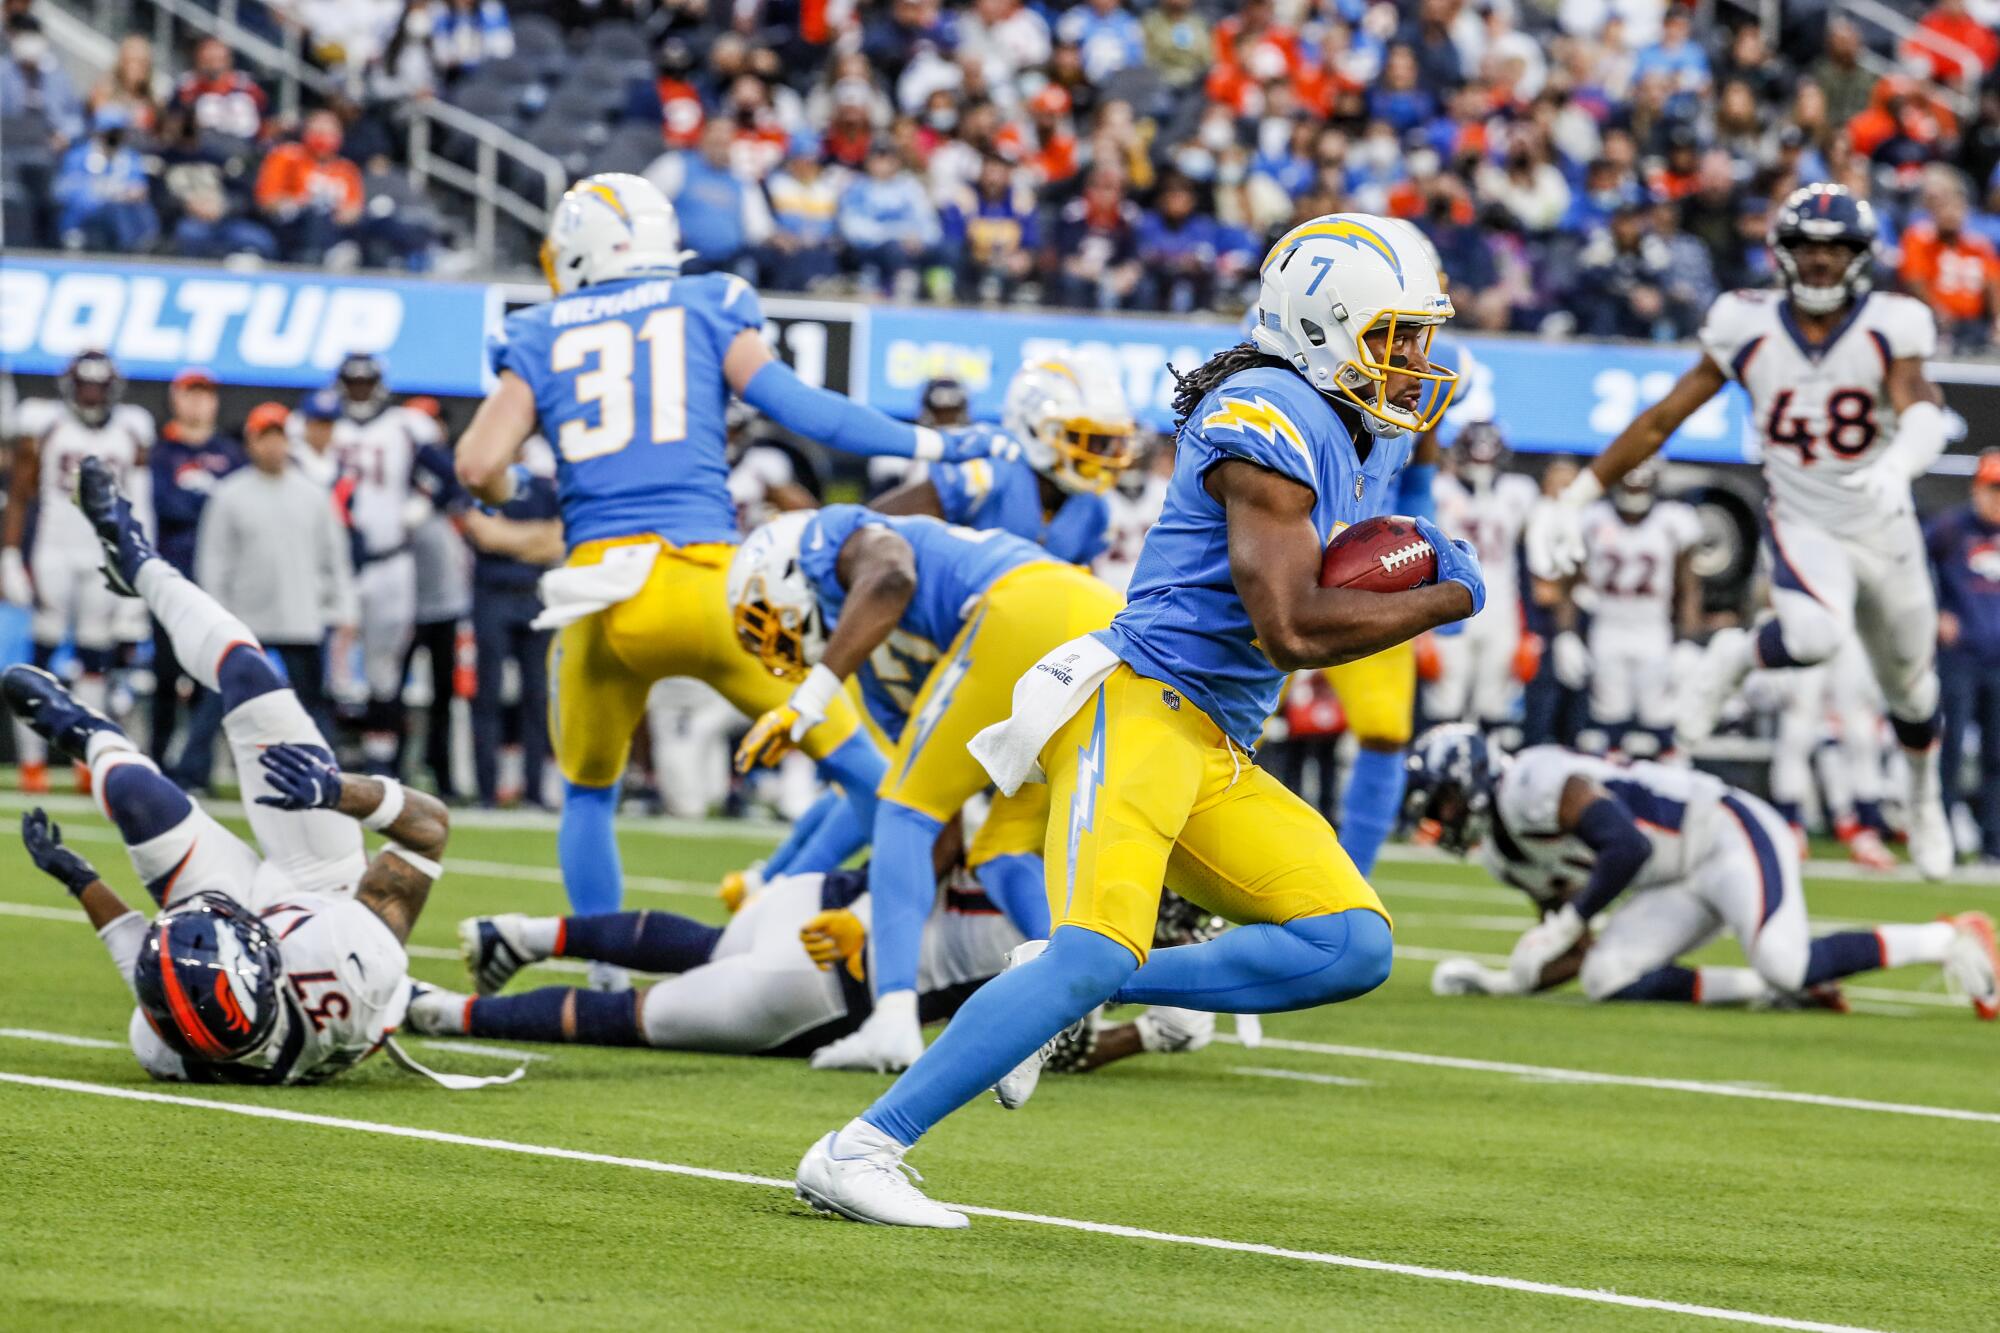 Andre Roberts scores on a 101-yard kickoff return during the second half for the Chargers.